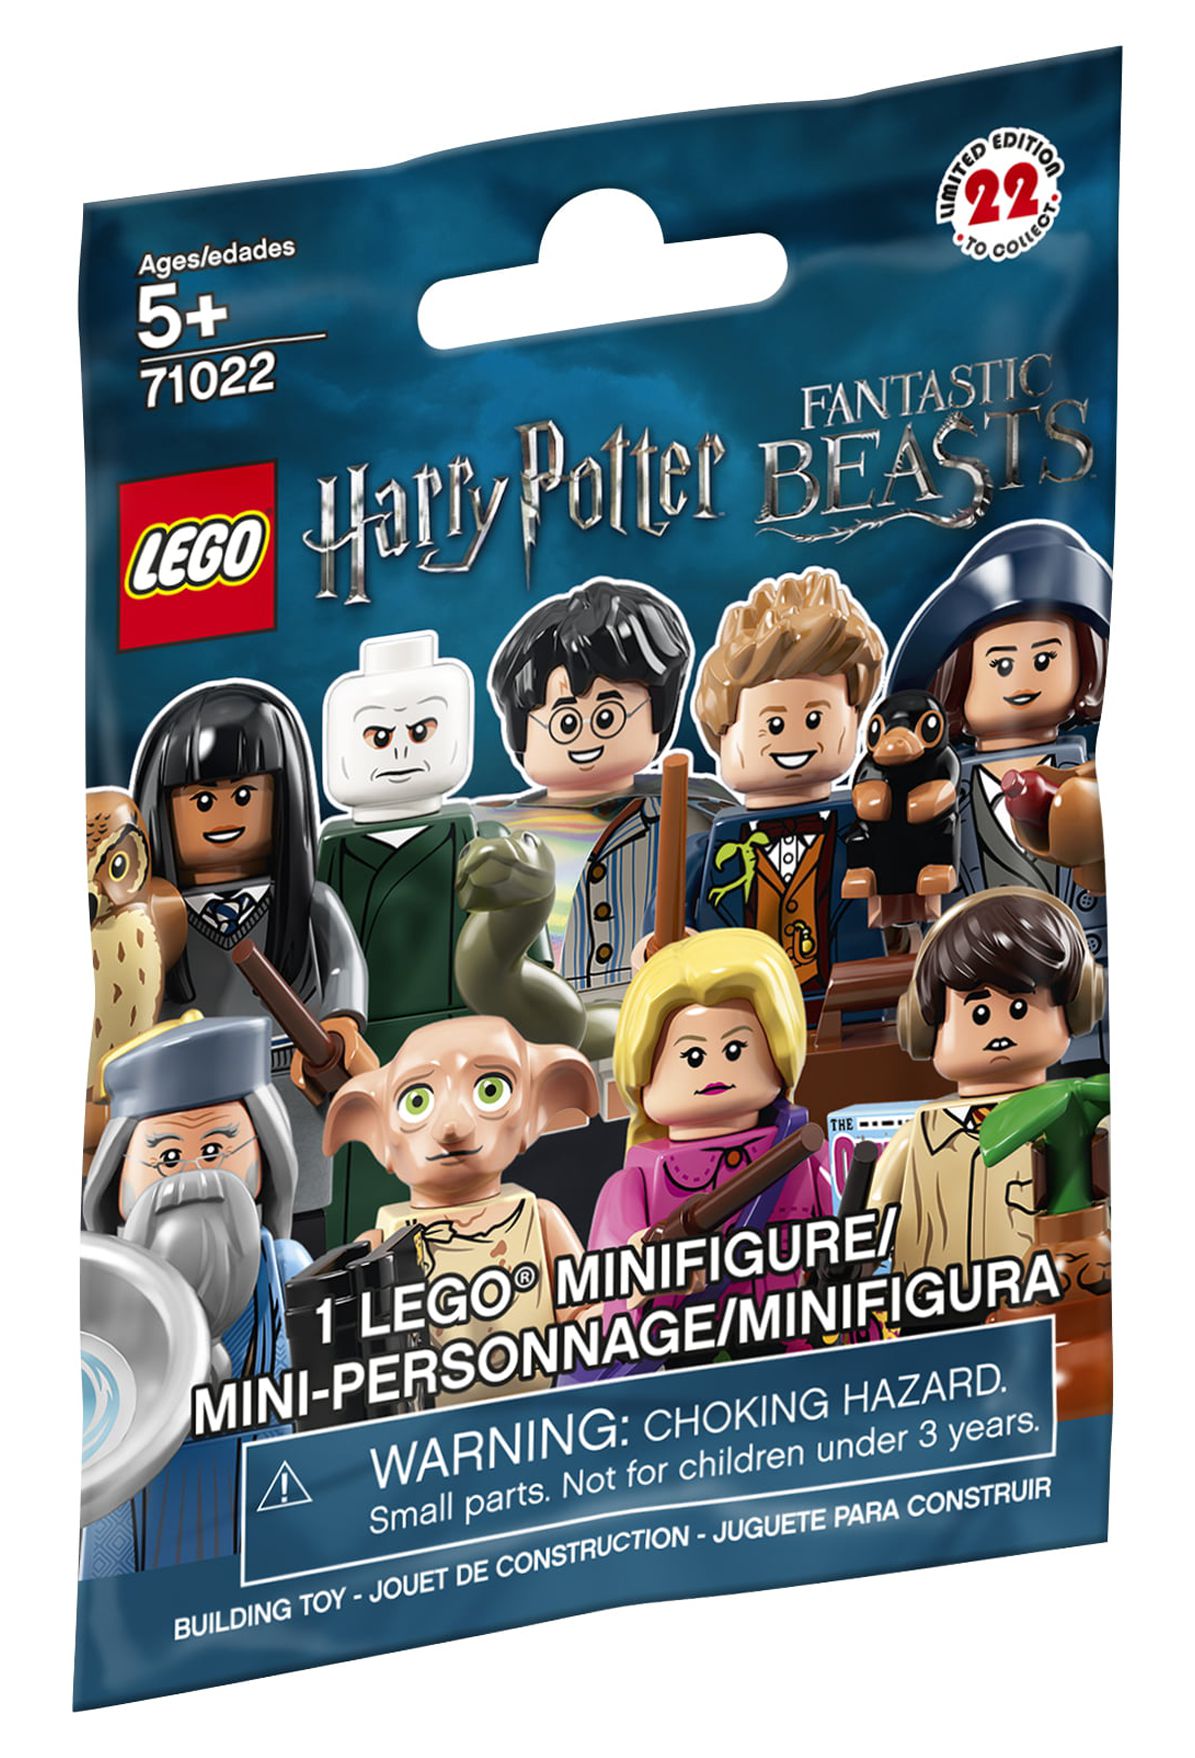 LEGO Minifigures Harry Potter and Fantastic Beasts 71022 Toy of the Year 2019, (1 Minifigure, 8 Pieces) - image 5 of 7